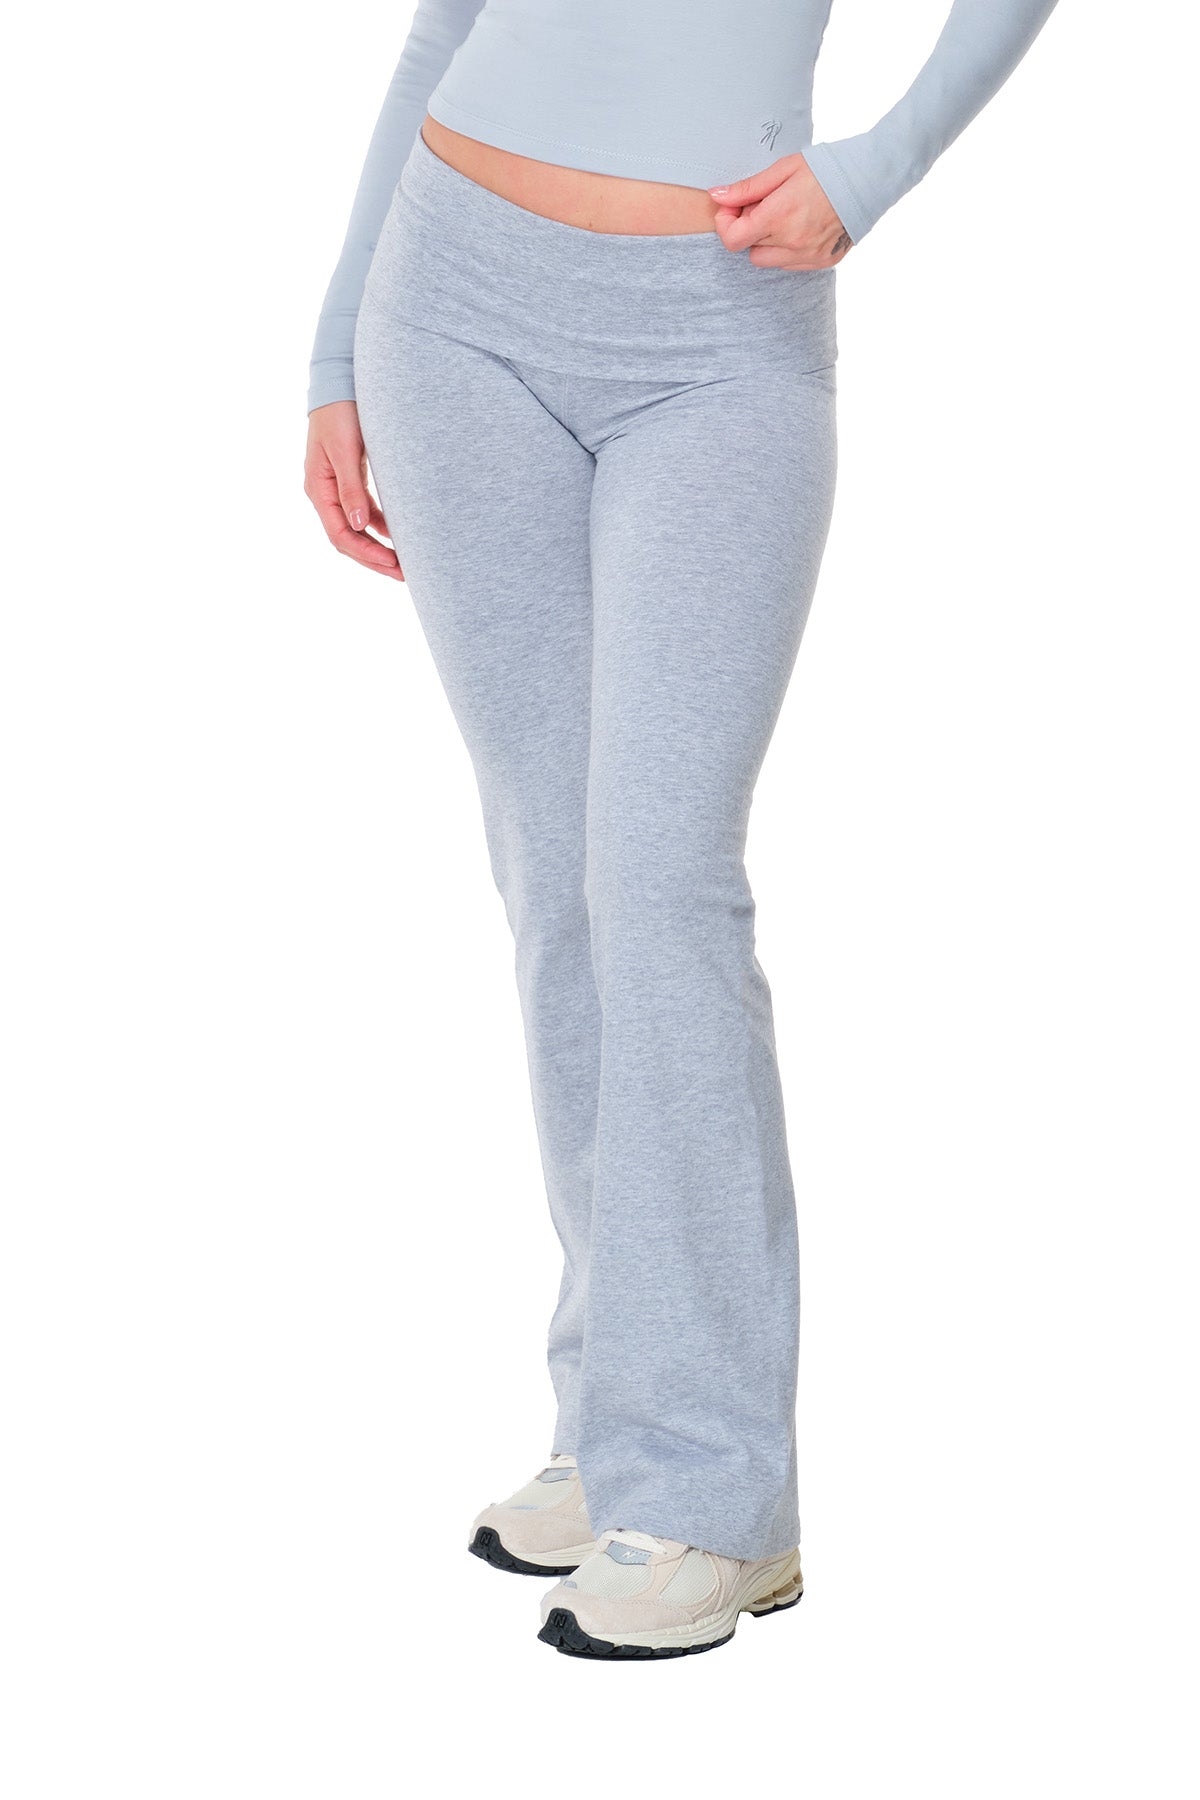 Tally - Flared Turnover Pant in